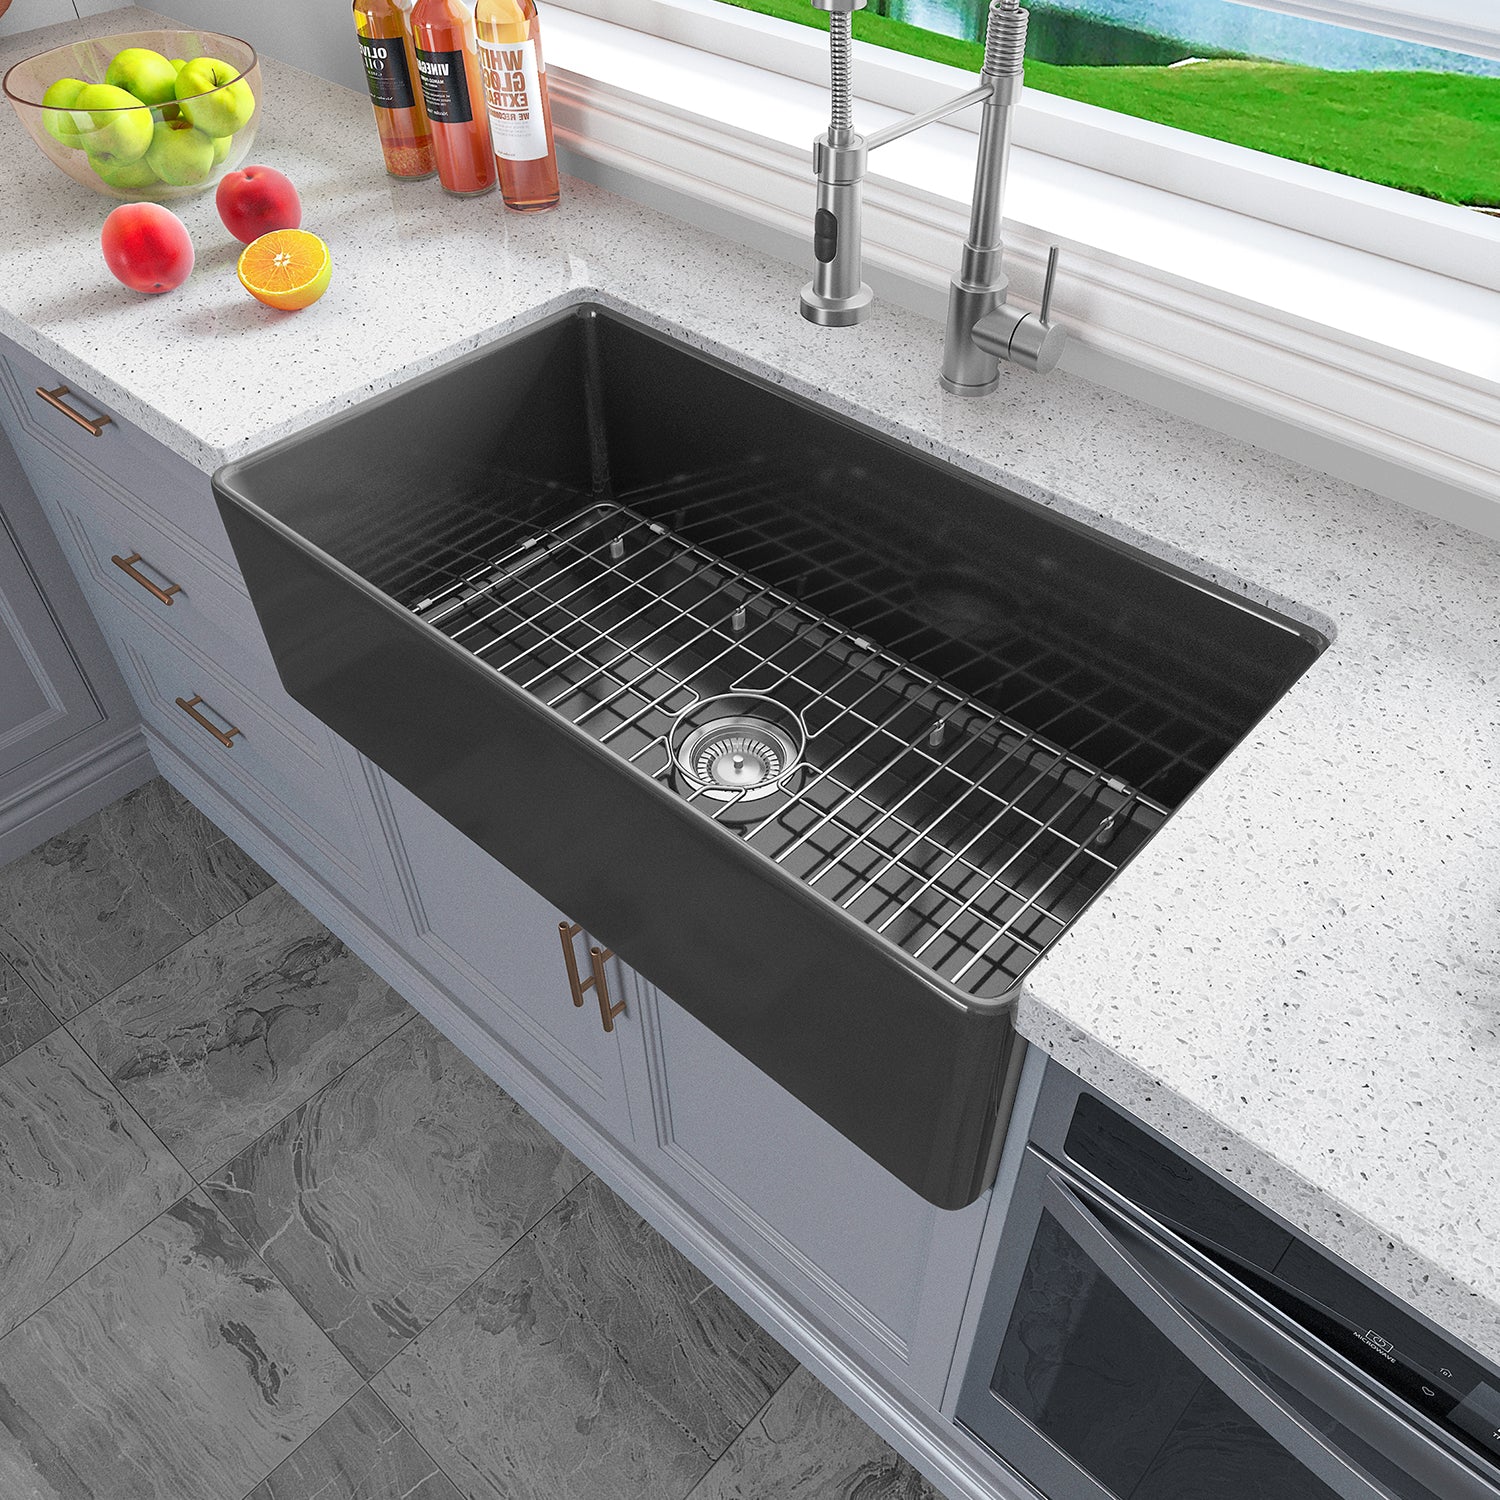 Sinber 33 Inch Farmhouse Apron Single Bowl Kitchen Sink with Fireclay Black Finish 2 Accessories F3318S-B-OL